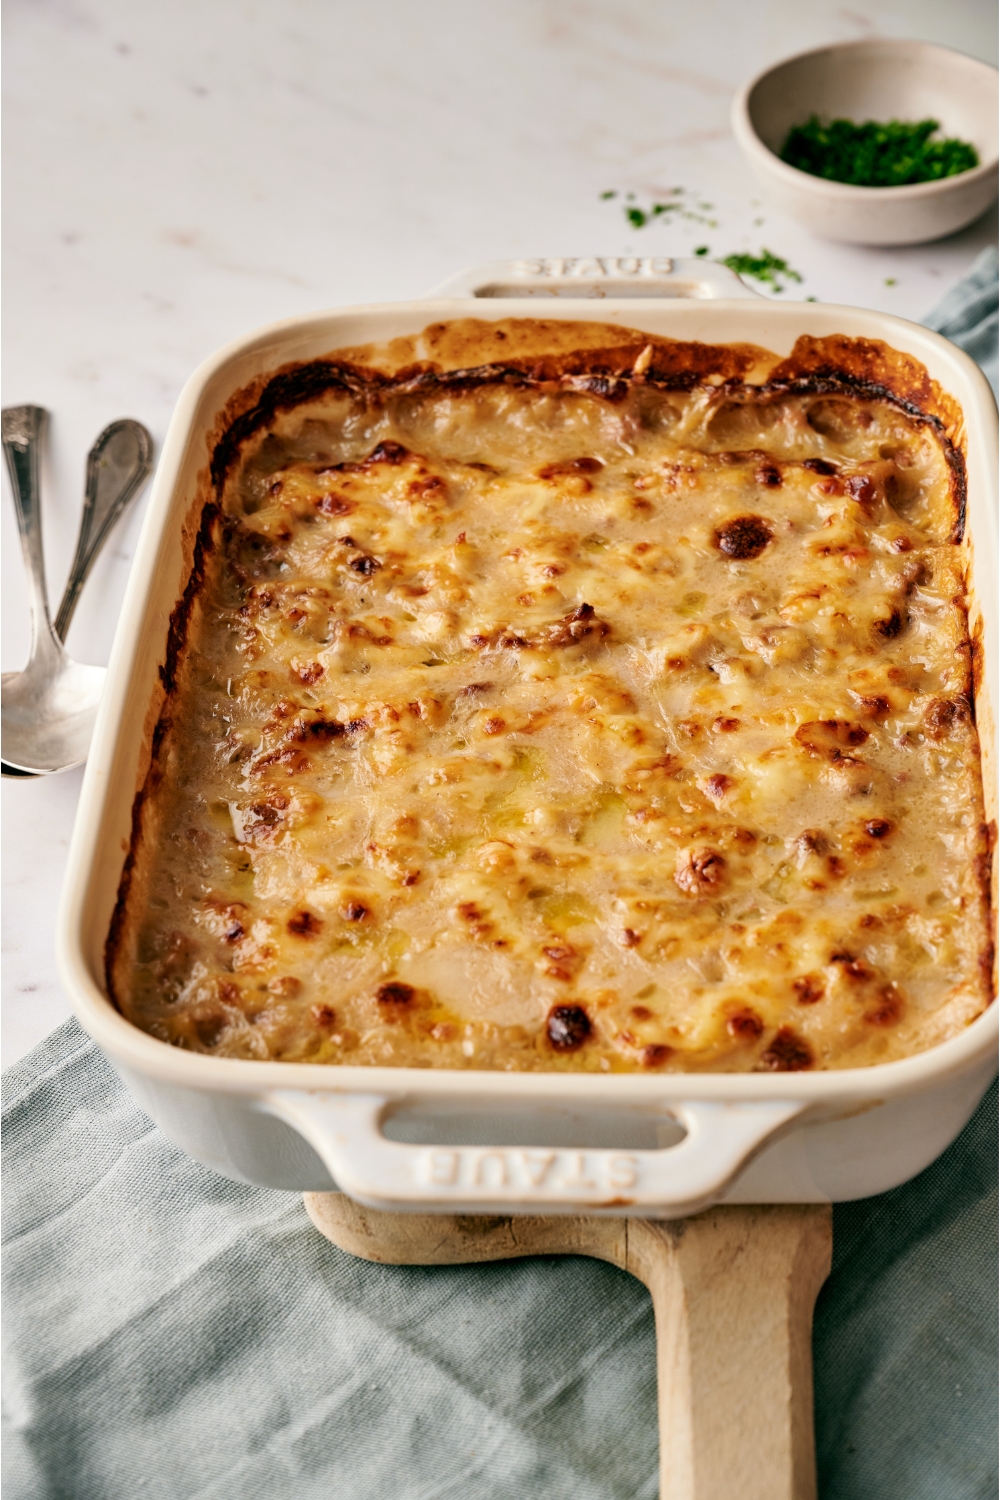 A white baking dish filled with freshly baked casserole covered in a layer of bubbly melted cheese.